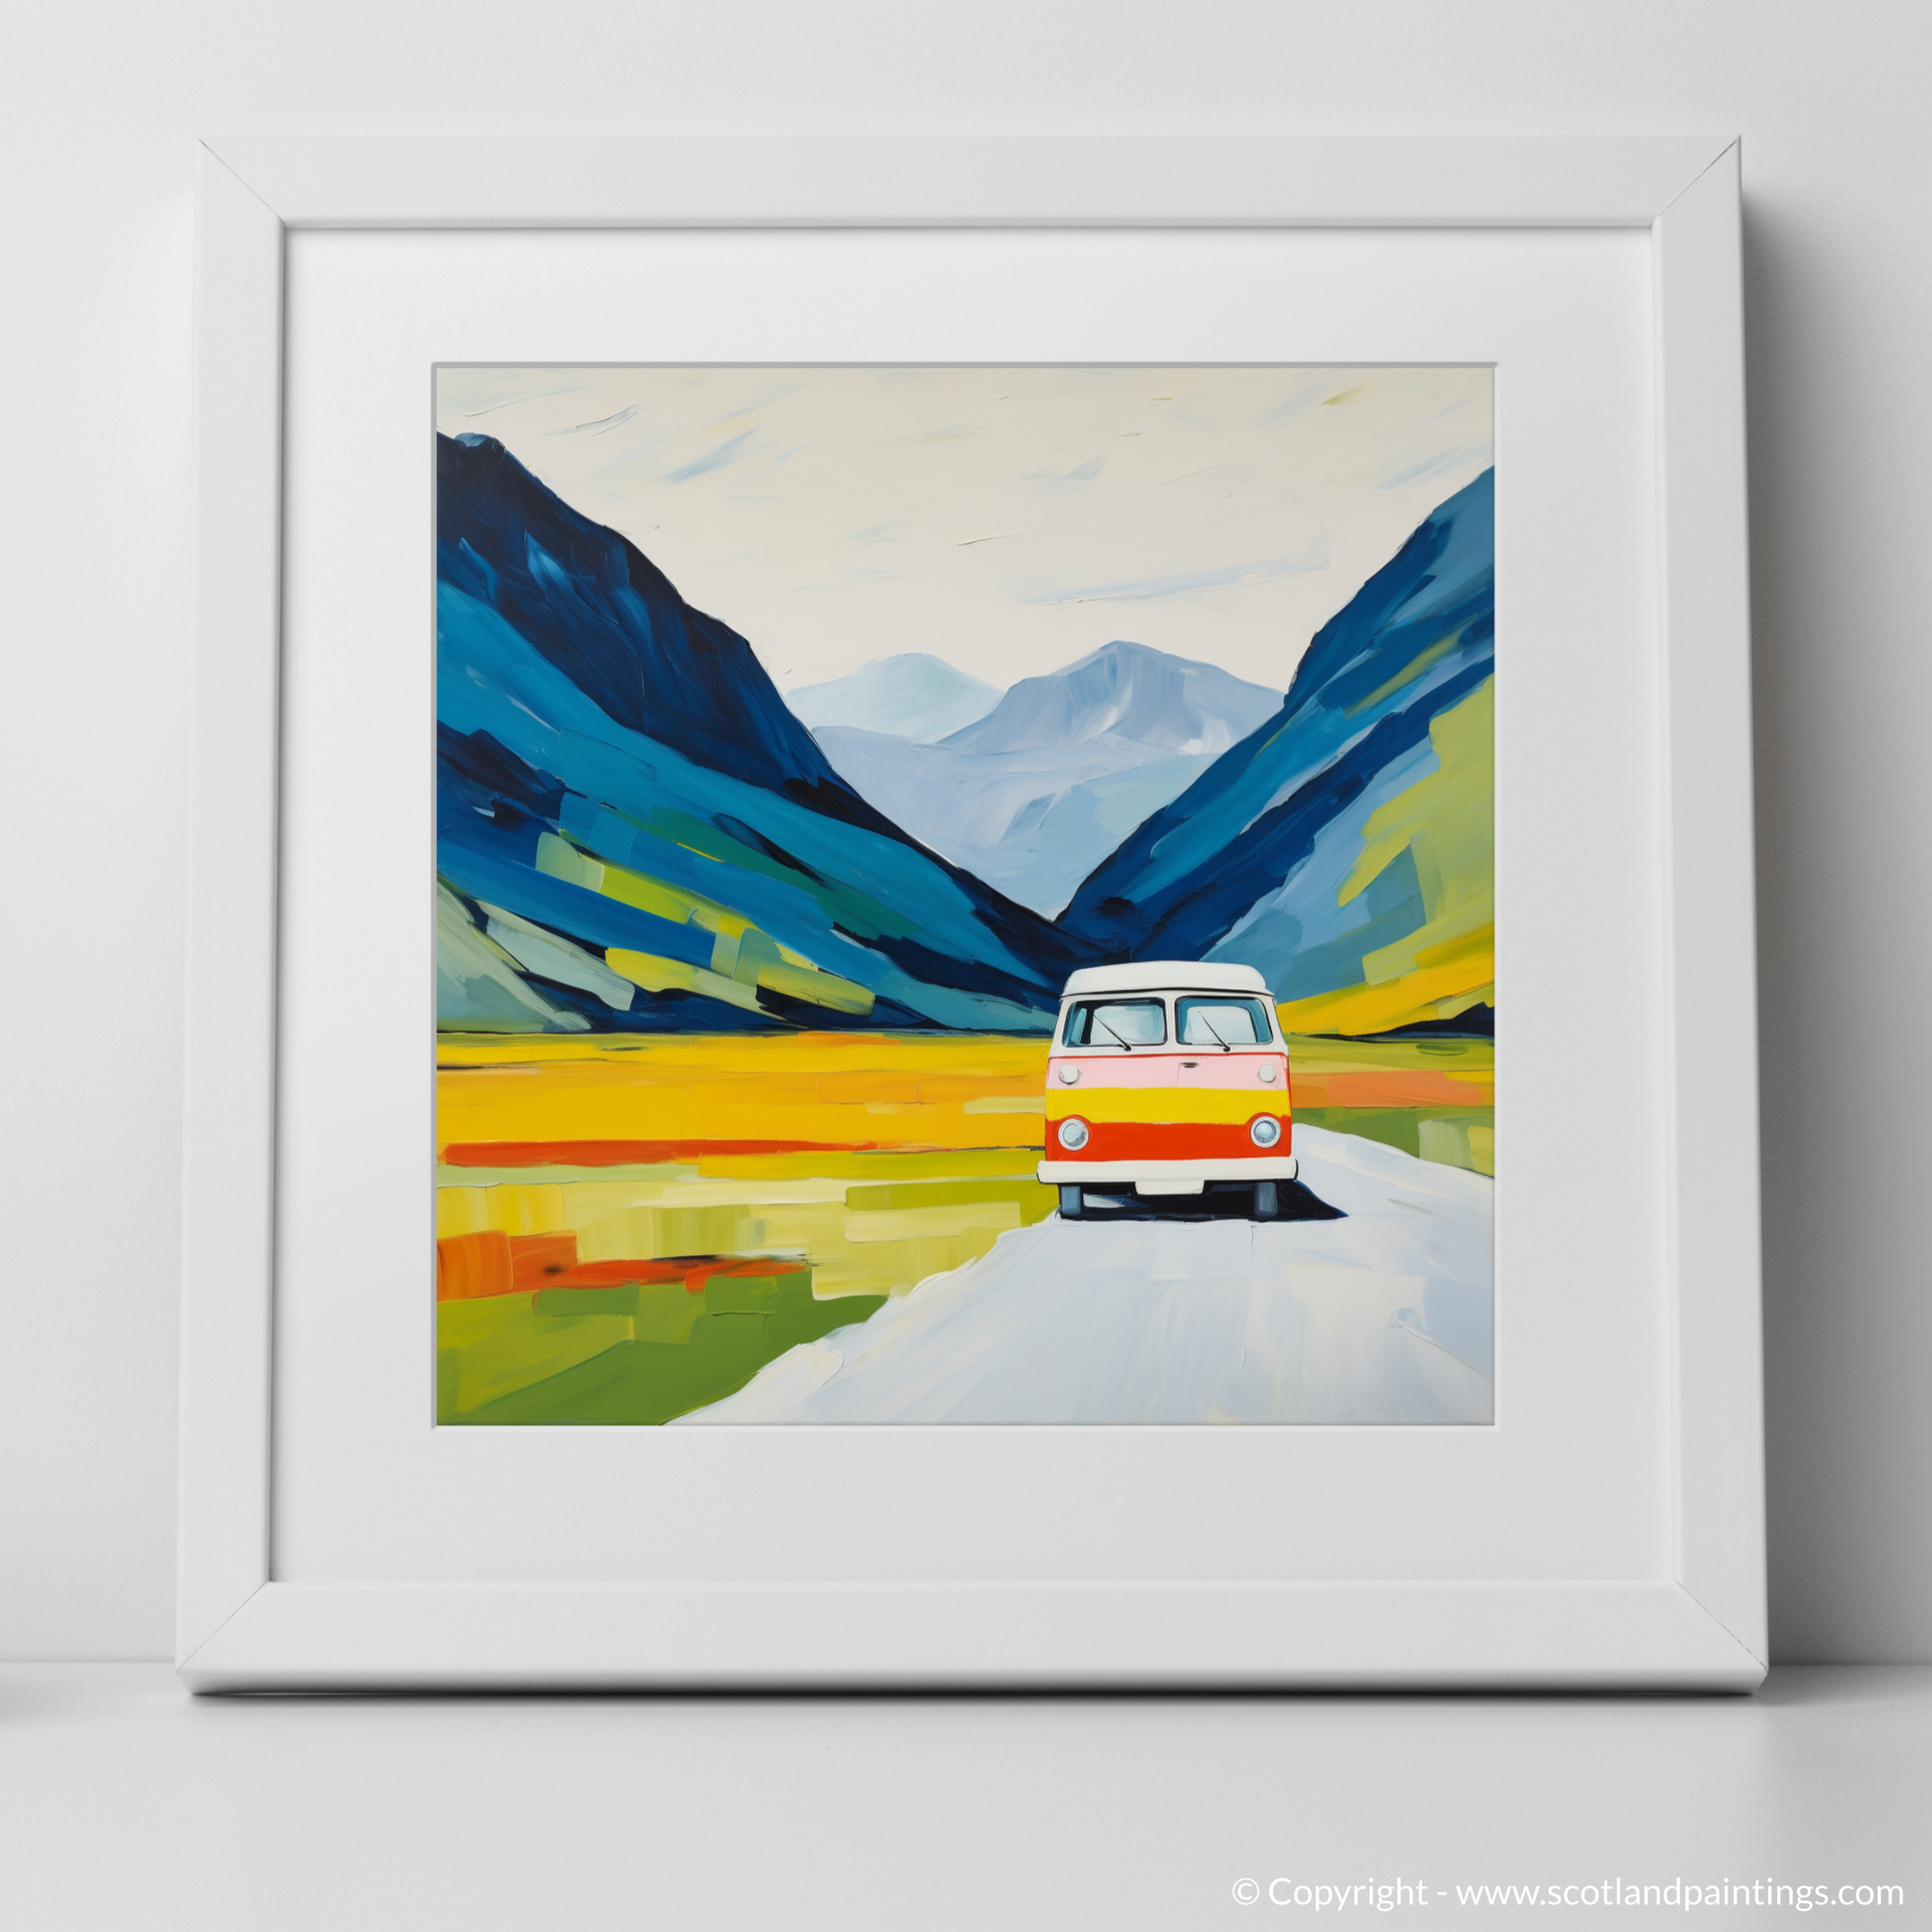 Art Print of Campervan in Glencoe during summer with a white frame